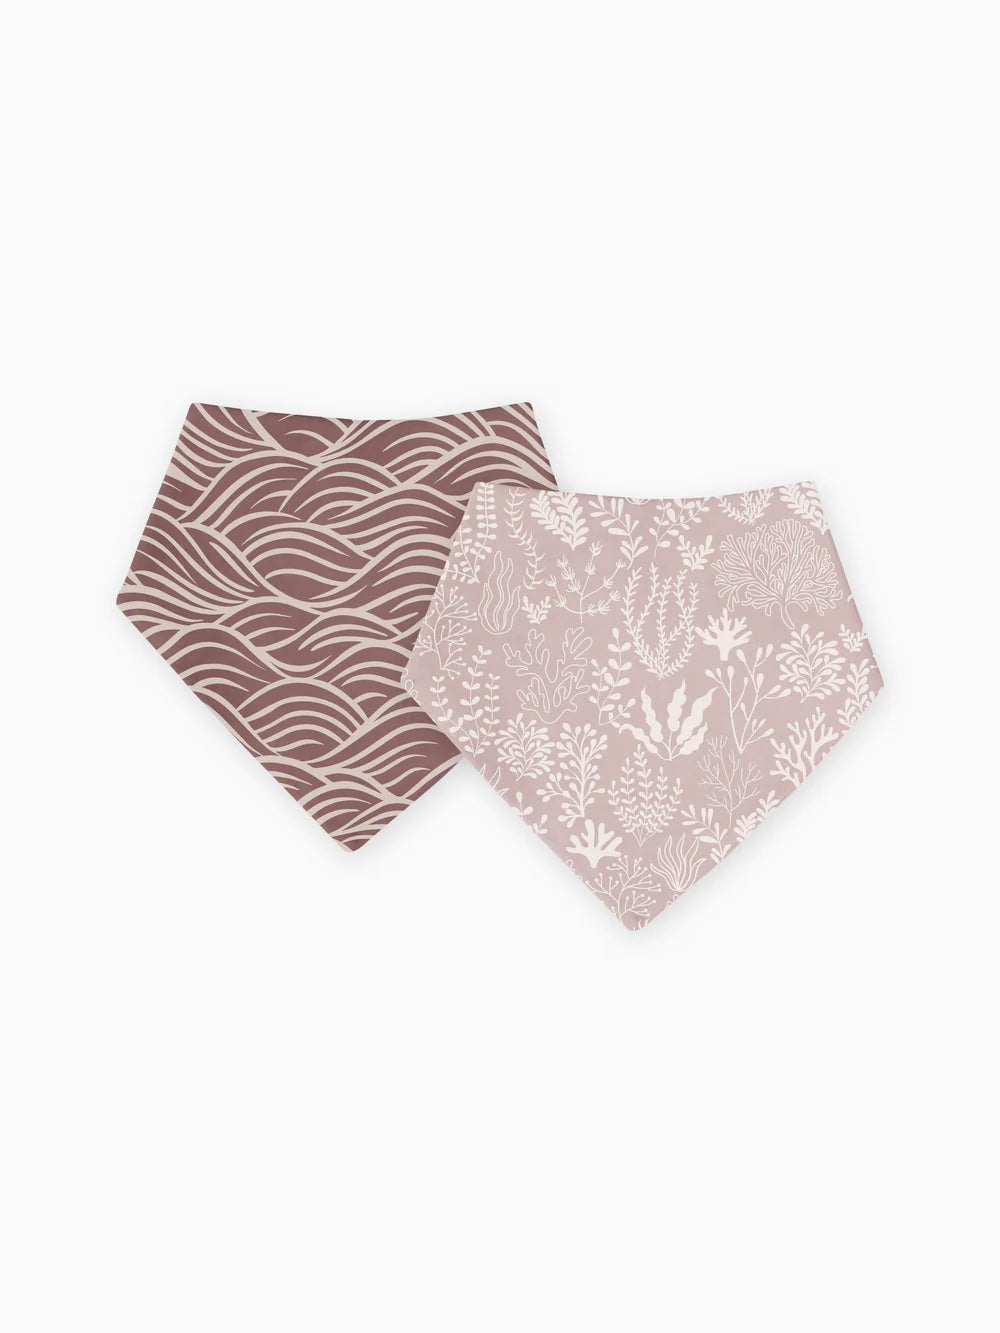 2-Pack Bibs | Aster + Coral Reef / Wisteria - The Yellow Canary